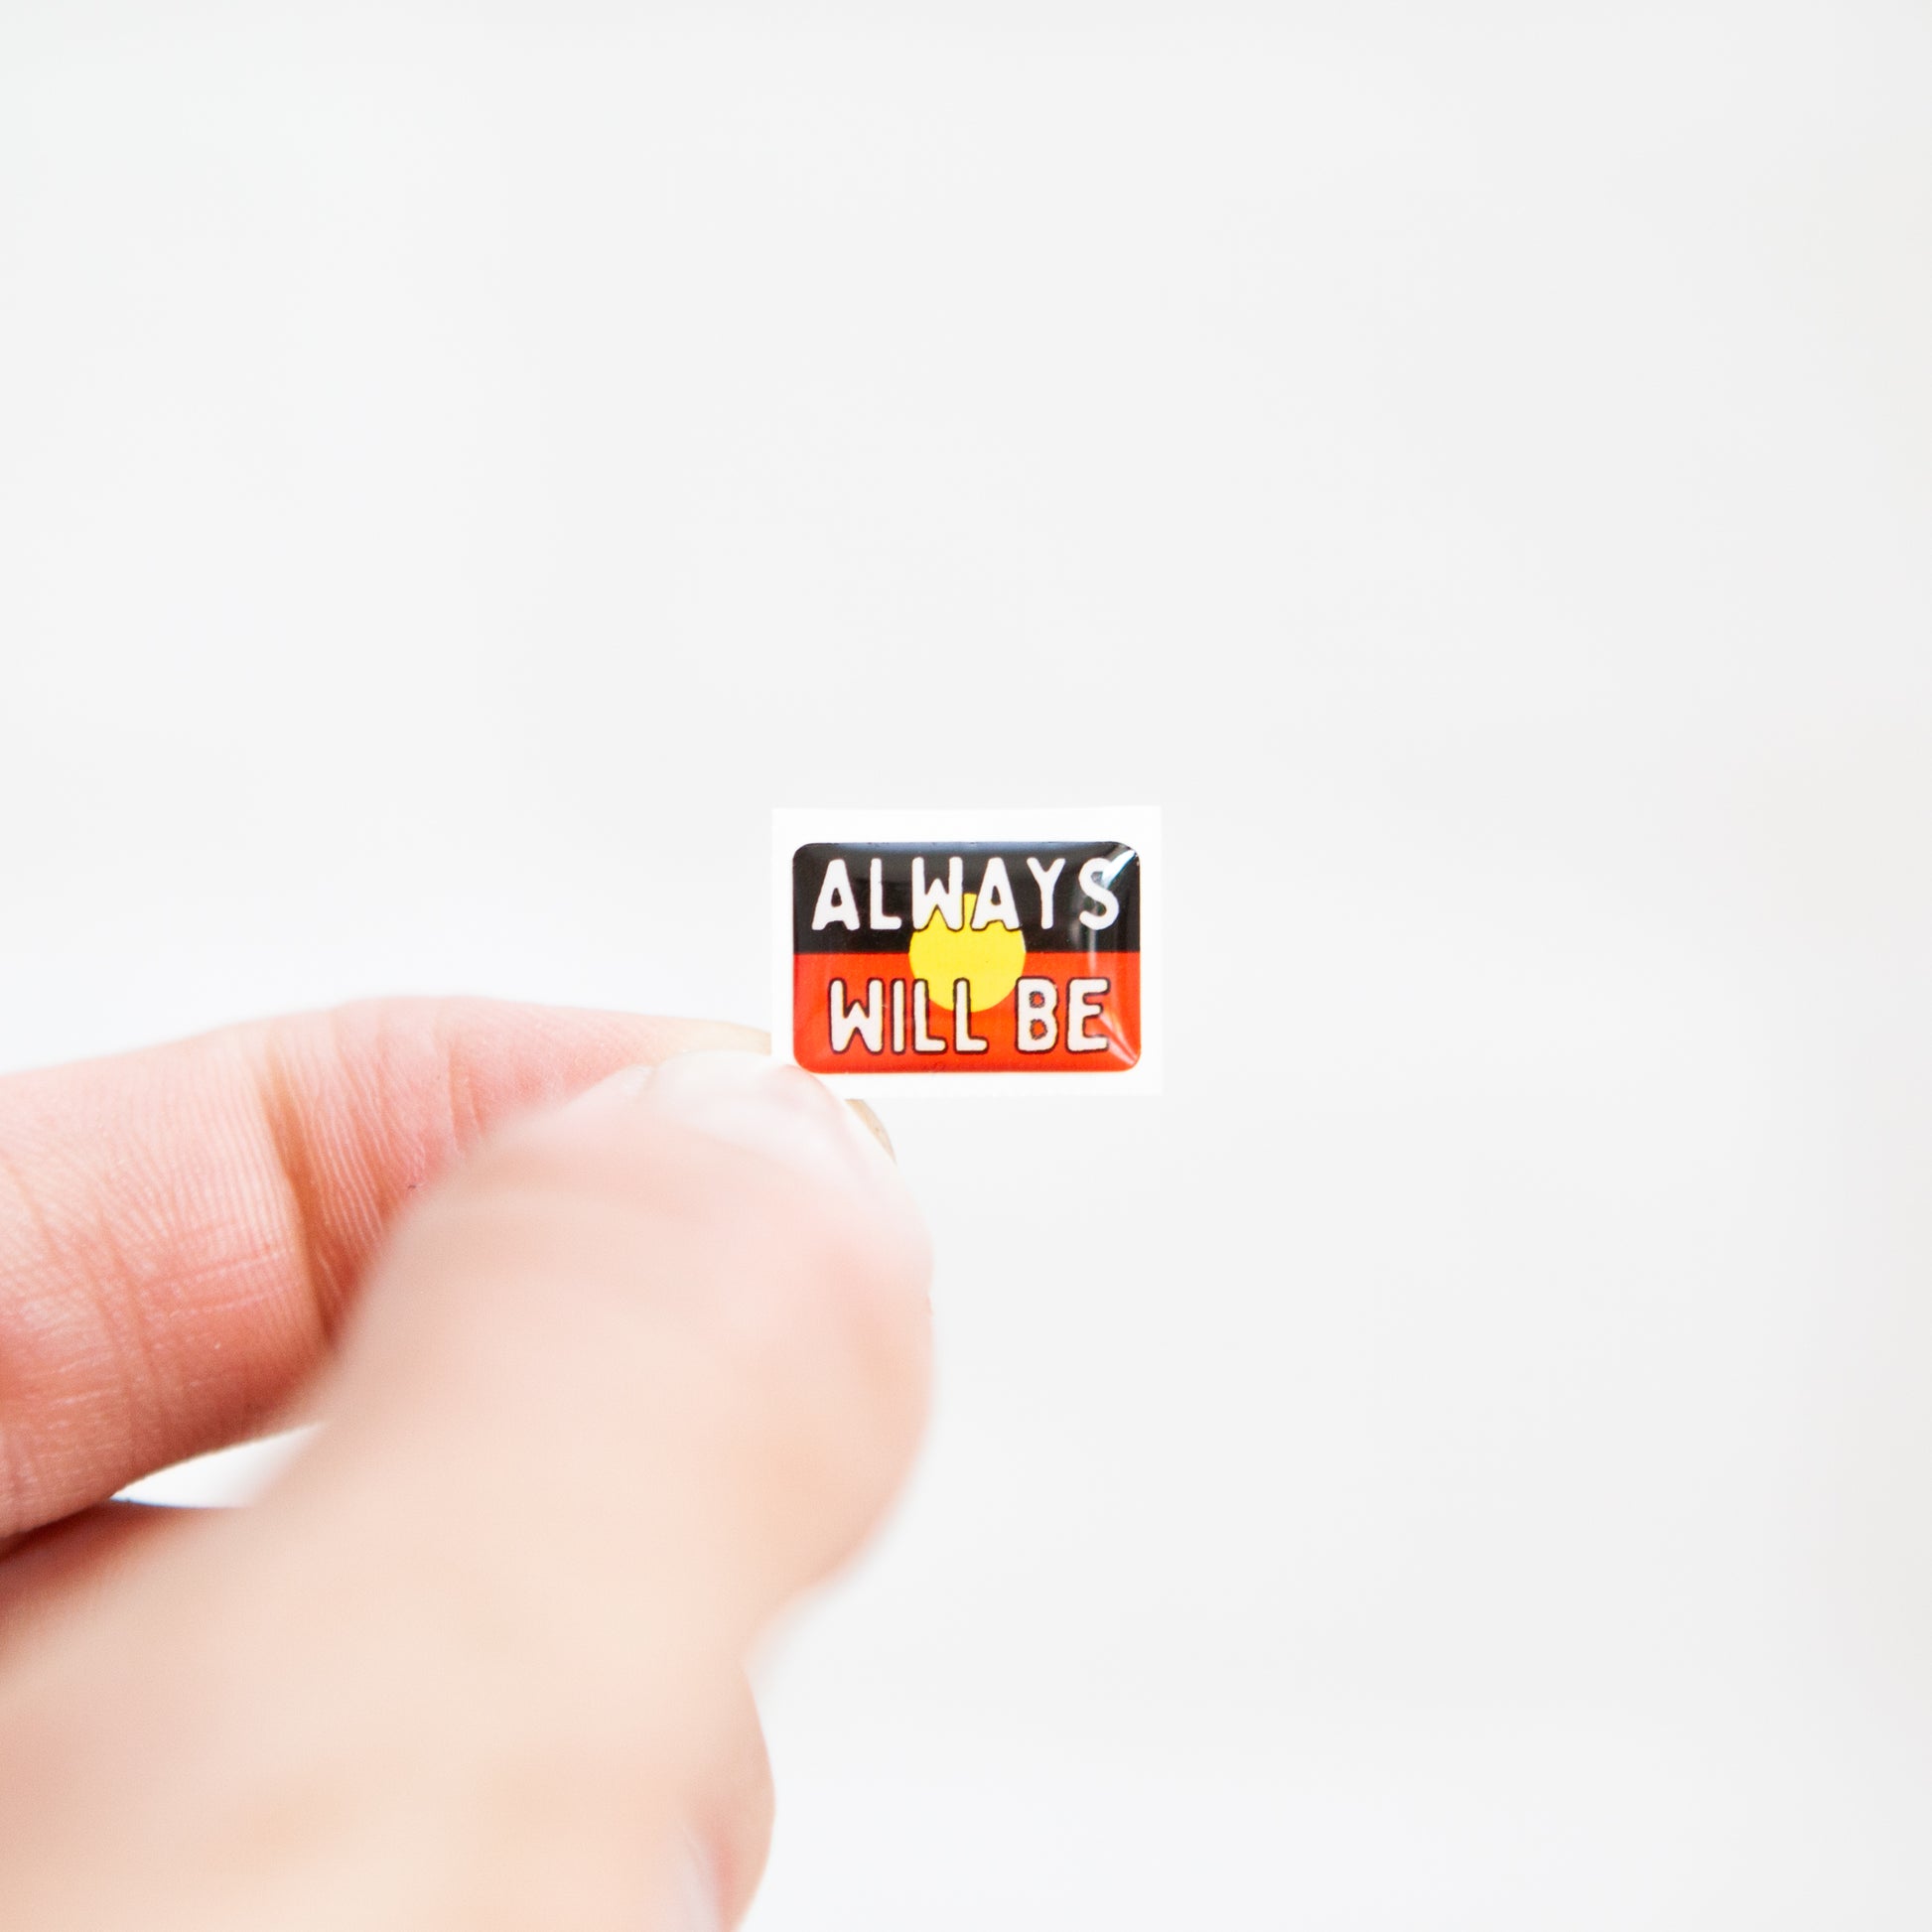 Badgie Always Will Be Aboriginal Land Sticker - Small, durable epoxy resin sticker with bright colors, designed for name badges and ID tags to support Aboriginal and Torres Strait Islander peoples.